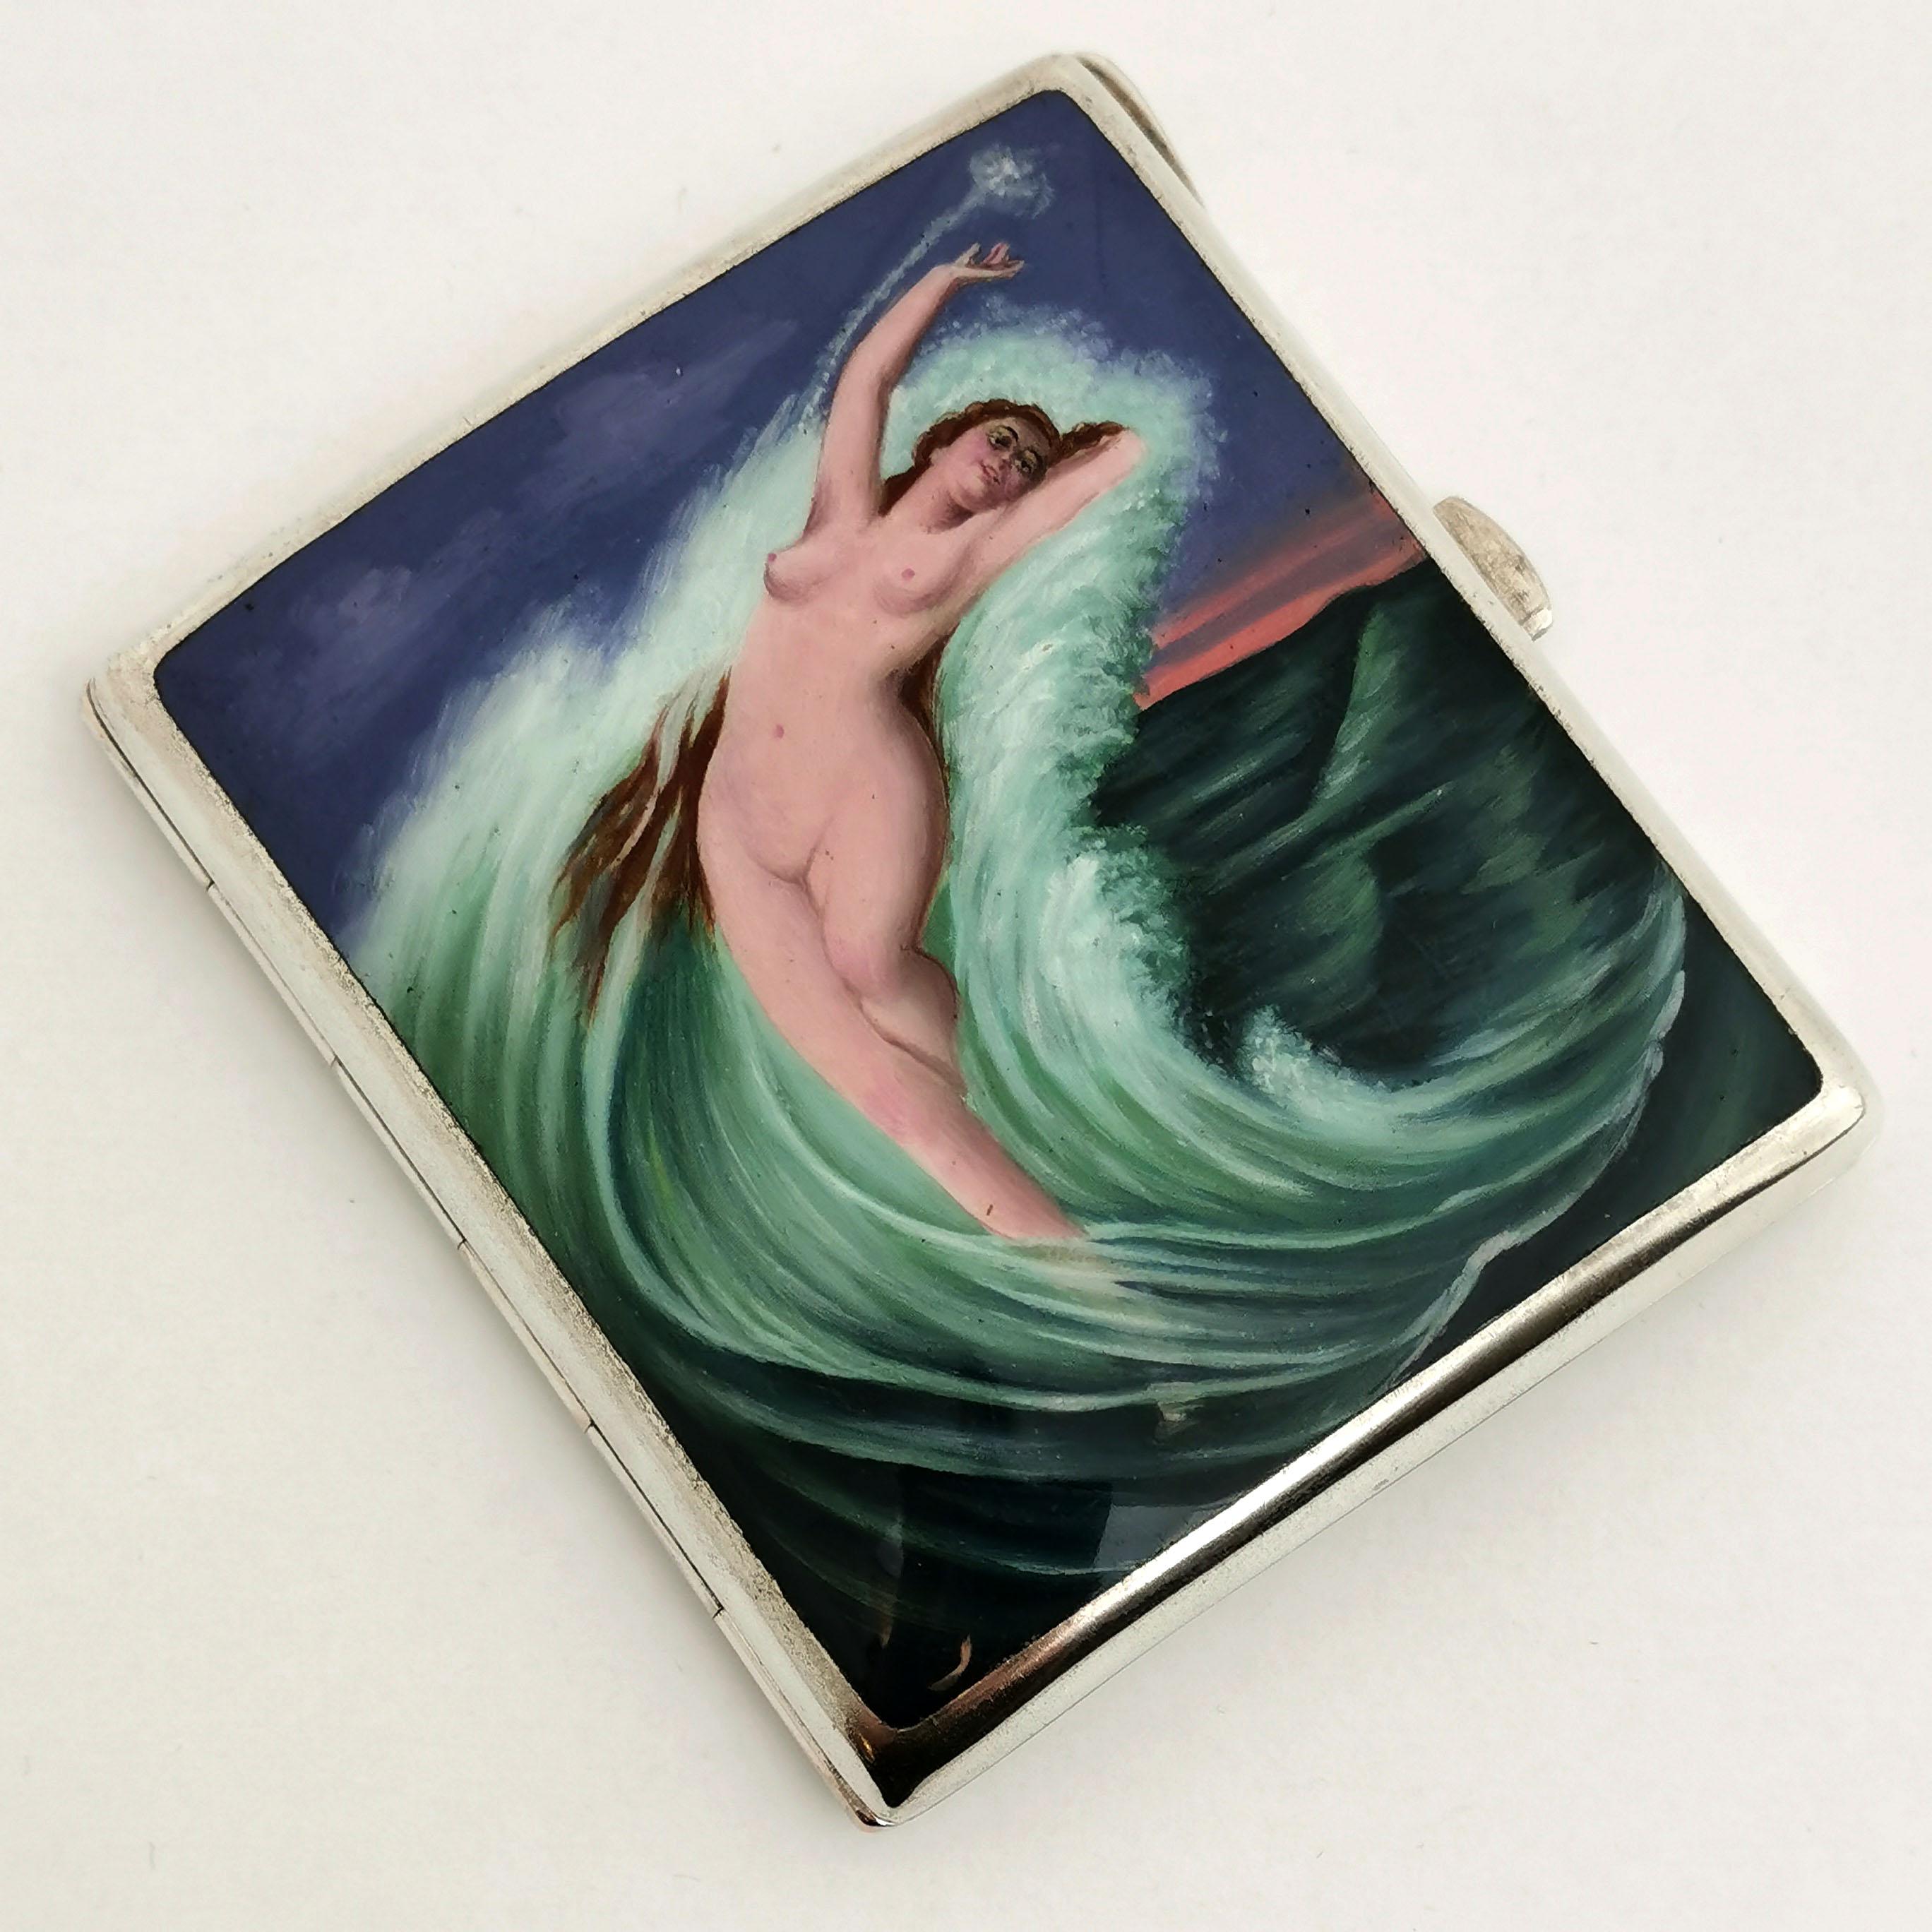 A gorgeous Antique solid Silver Cigarette Case with an Enamel Image on the front cover. This Image shows a nude woman with long brown hair surrounded by a cresting wave in the ocean. The Enamel Image is created in rich jewel tones and with a lovely